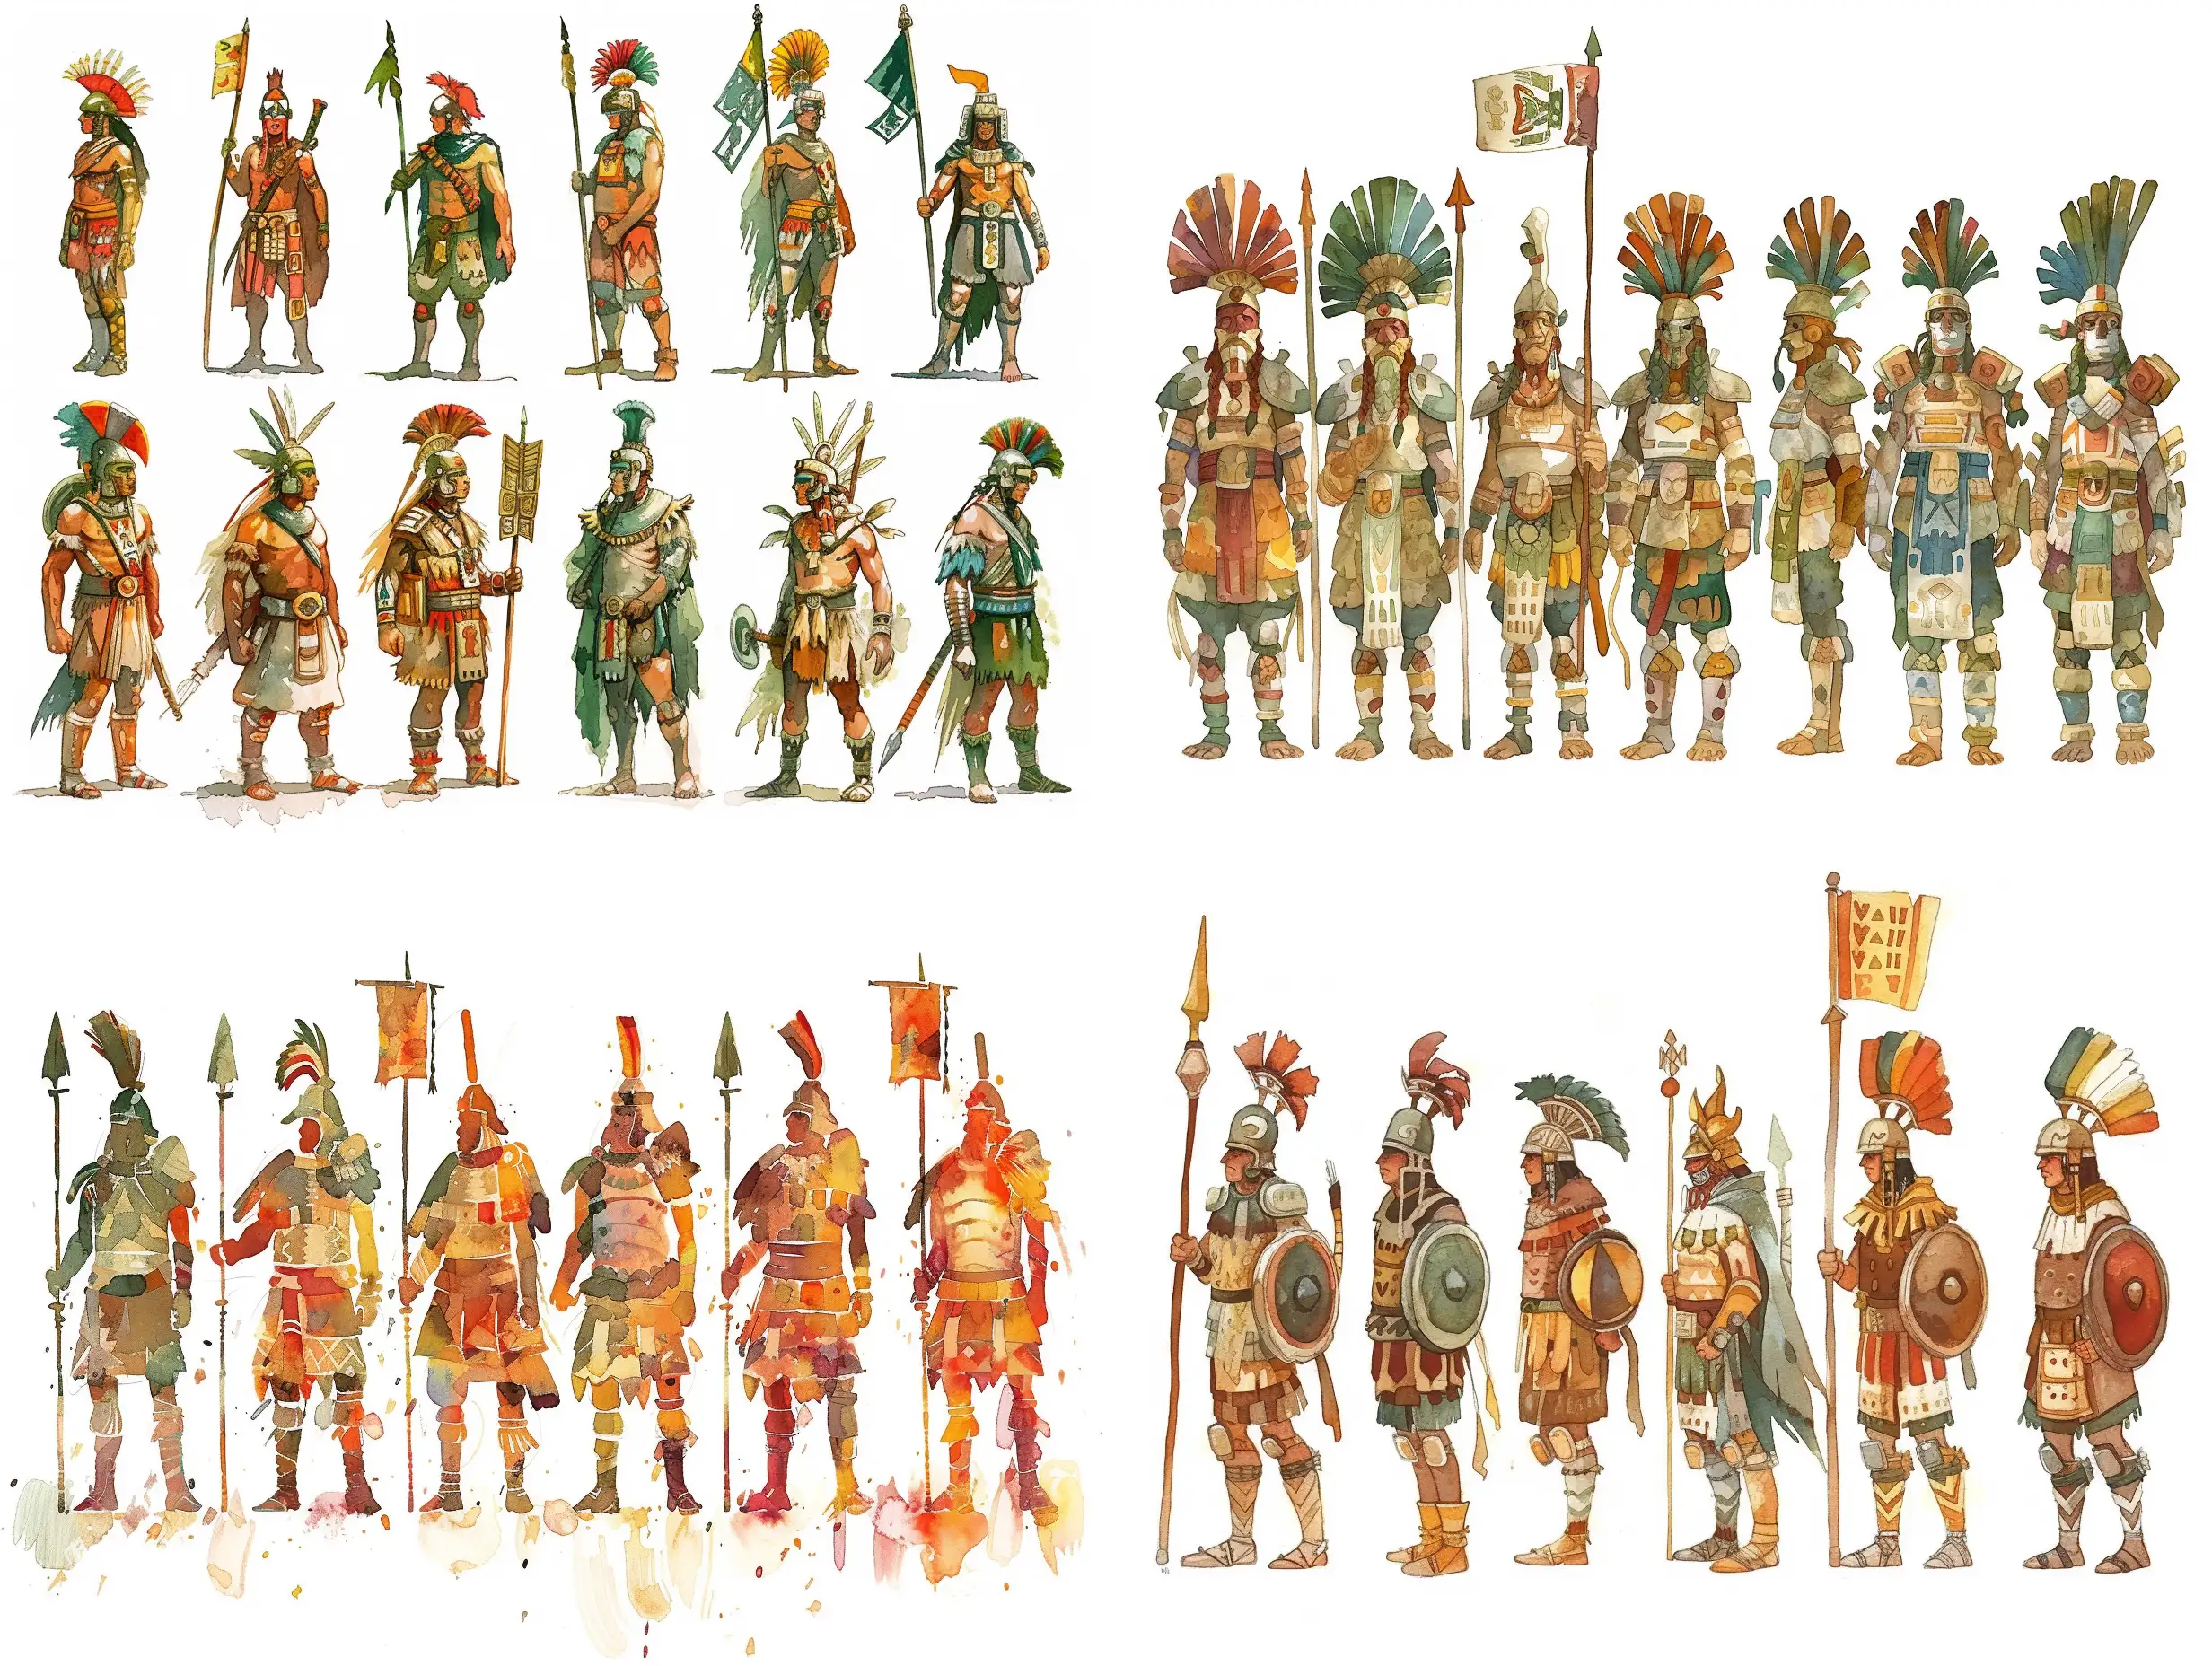 Ancient-Aztec-Warriors-Holding-Flags-Stylized-Watercolor-Illustration-by-Victo-Ngai